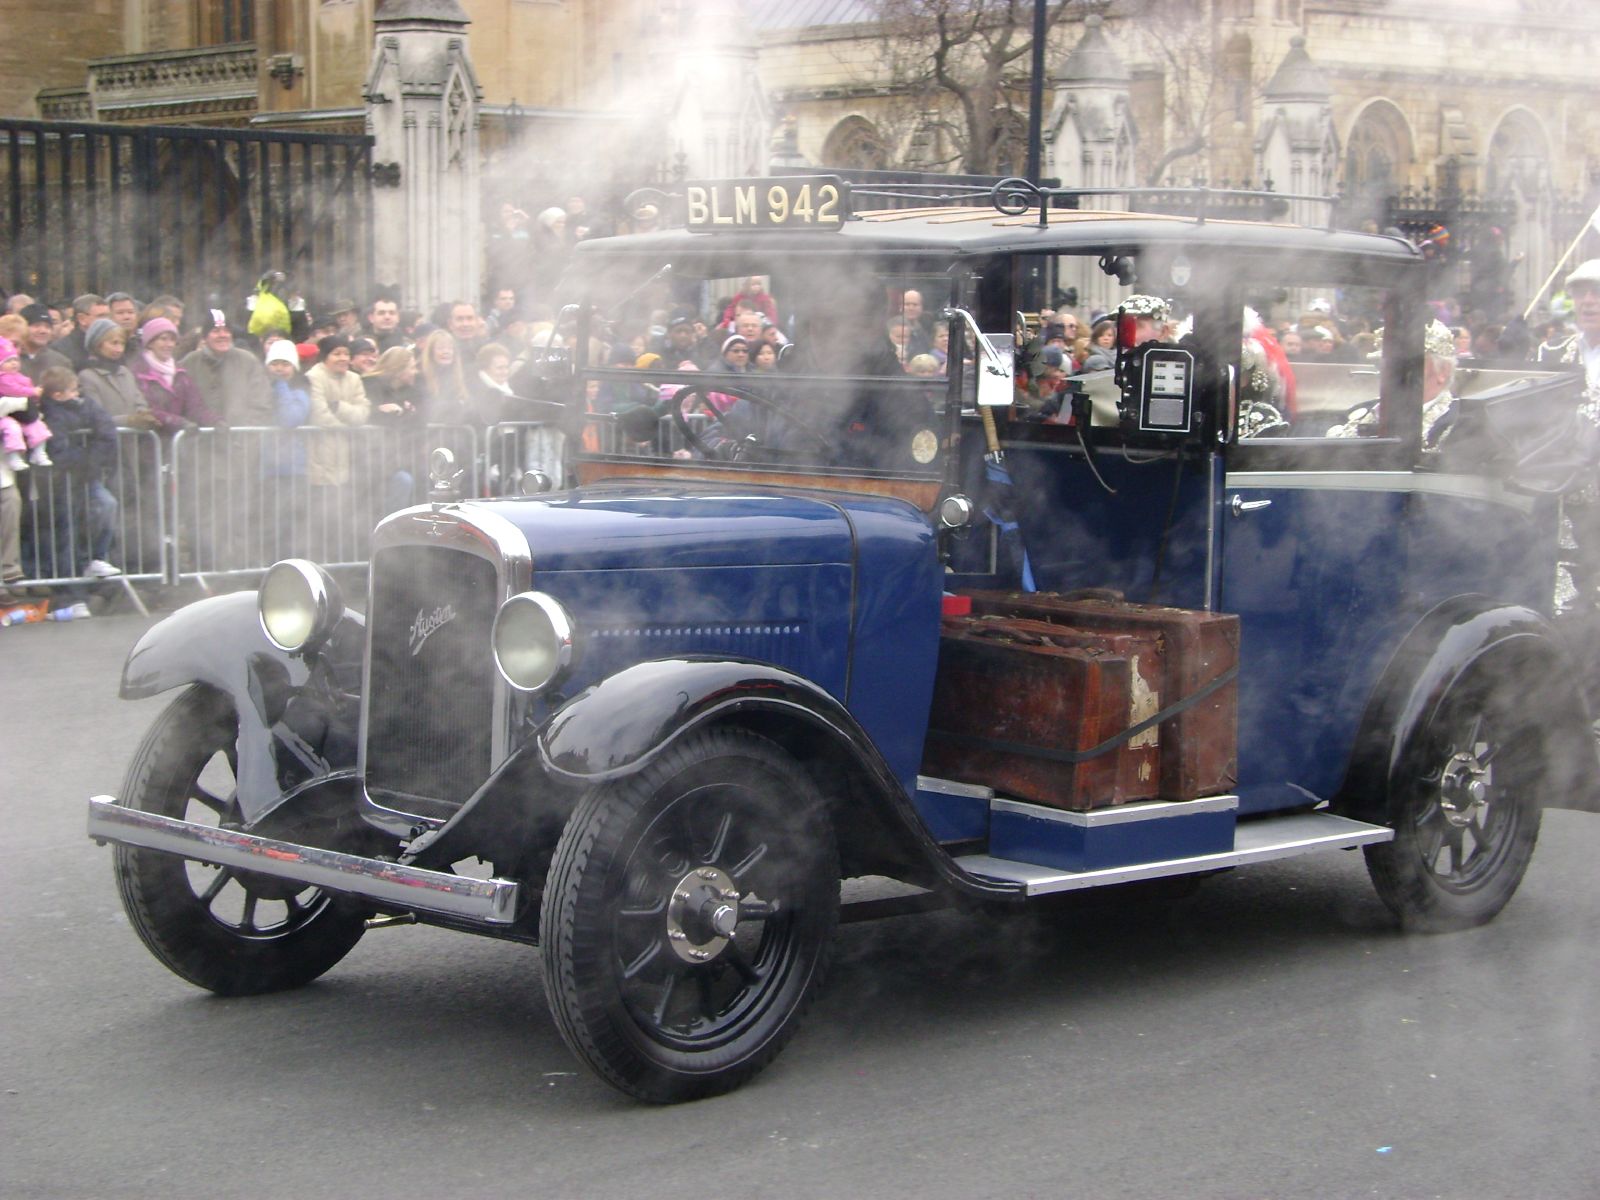 Old London Taxi | Flickr - Photo Sharing!